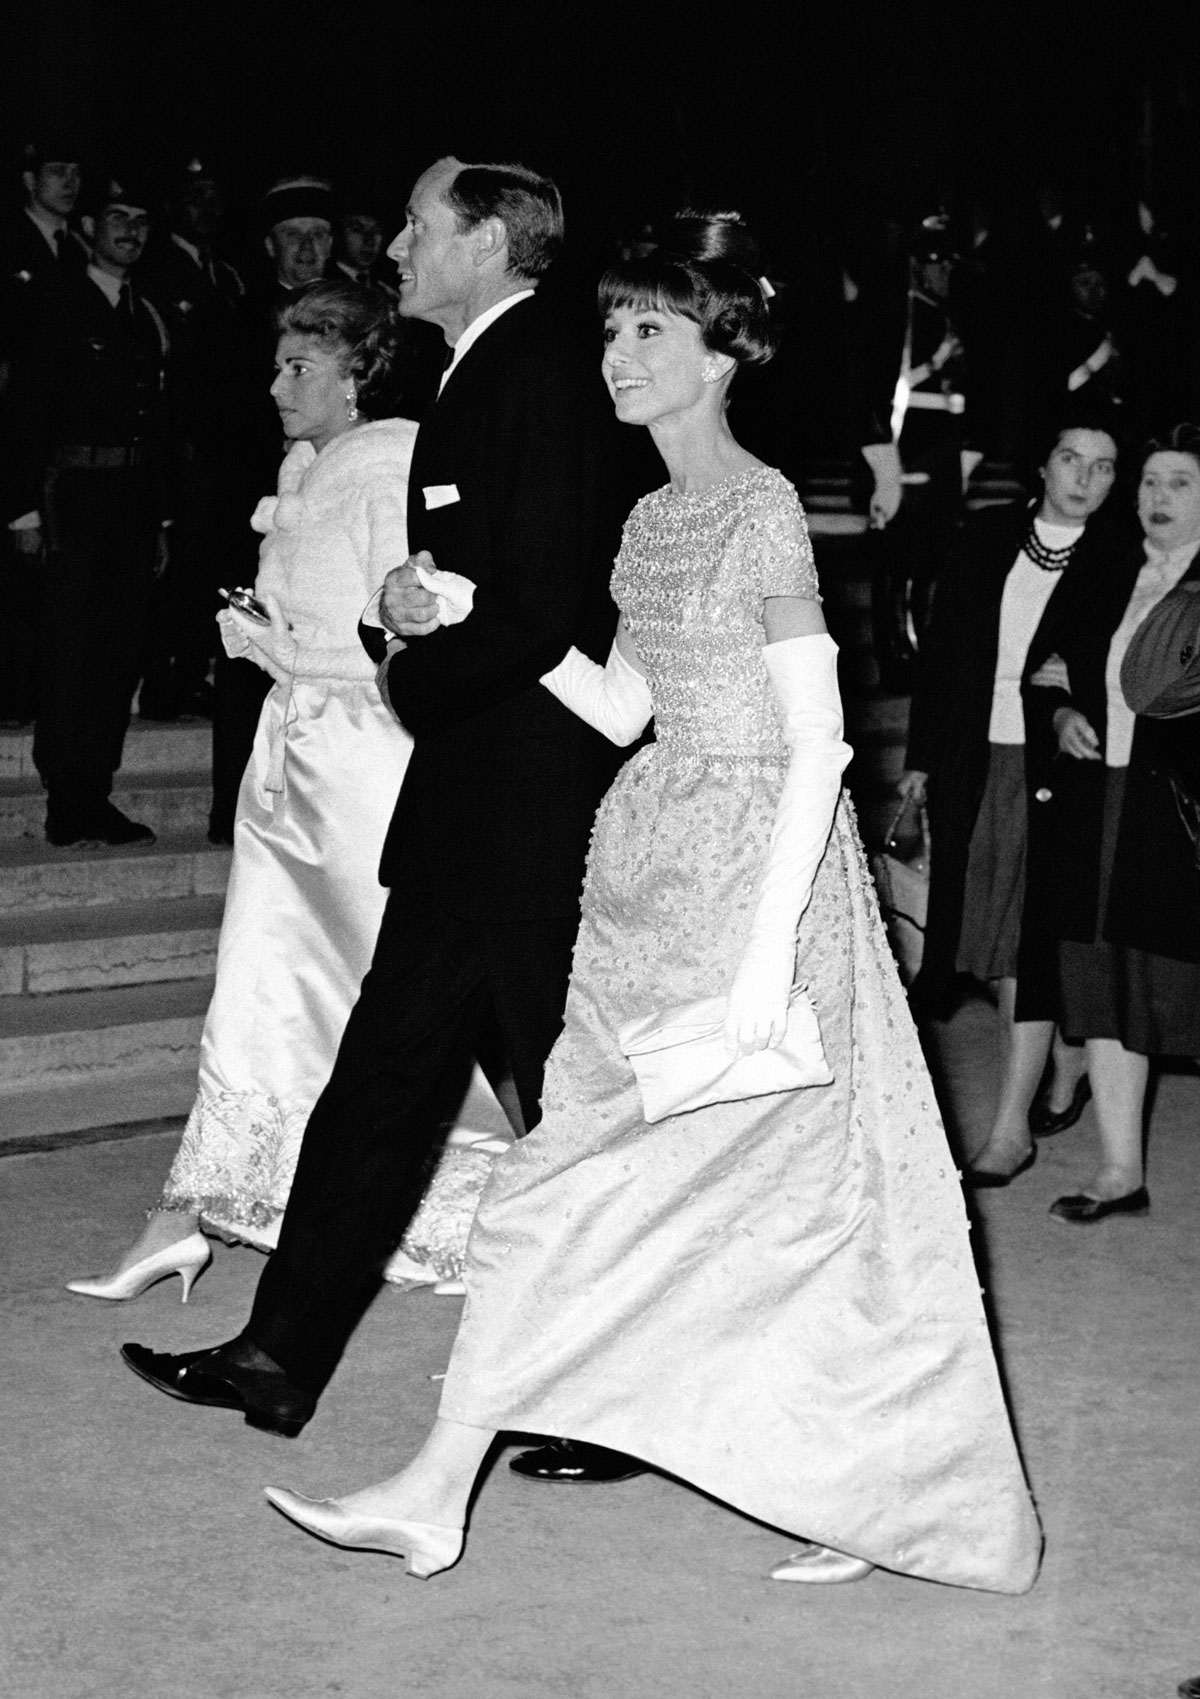 Audrey Hepburn wearing white gloves and an A-line gown at the Cannes Film Festival.